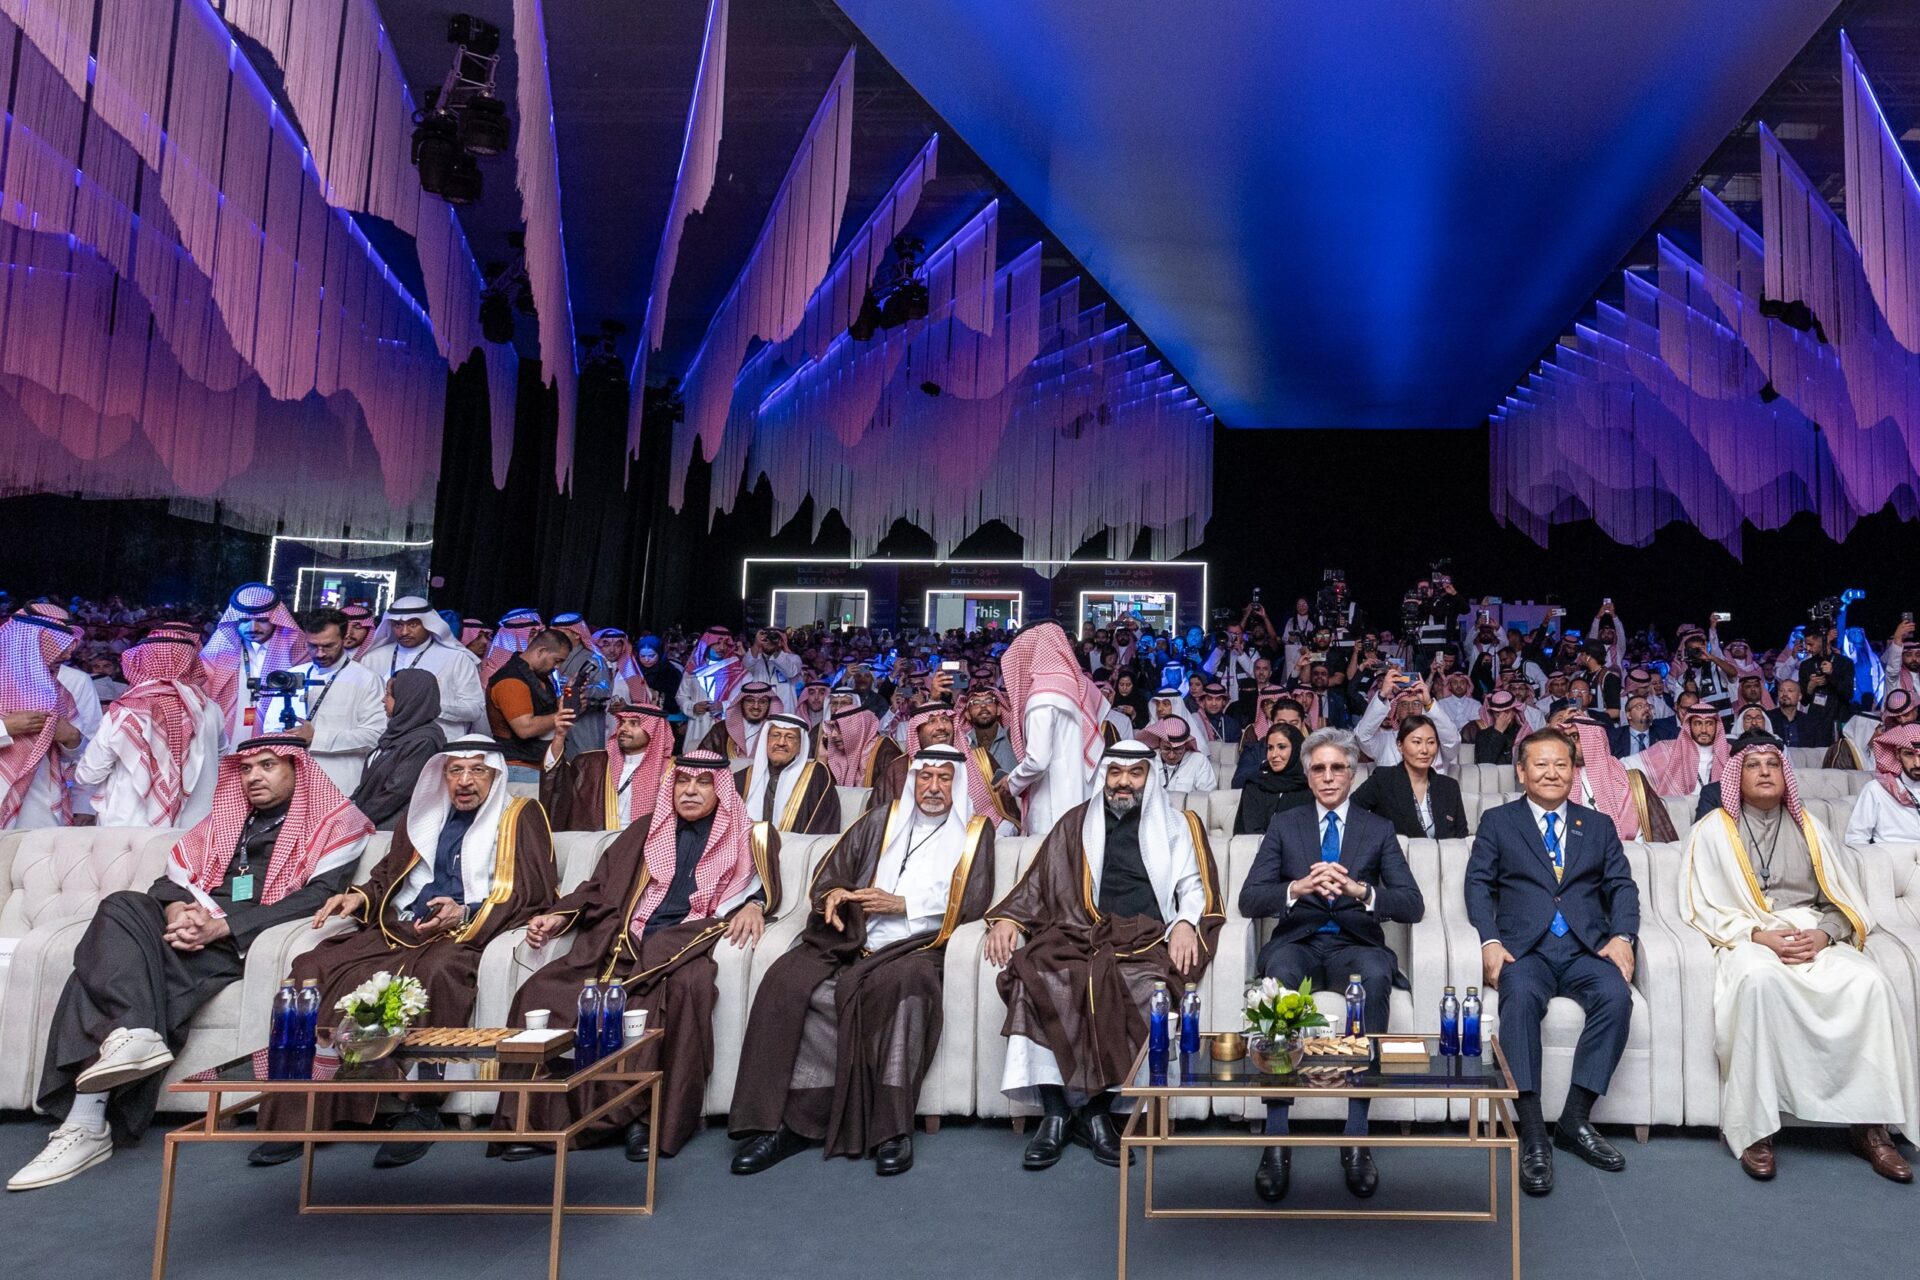 VIPs and delegates gather for the opening ceremony of LEAP24, a four-day global technology conference in Riyadh, Saudi Arabia. The first day included a keynote address by ServiceNow CEO Bill McDermott, third from right. (Photo: LEAP)